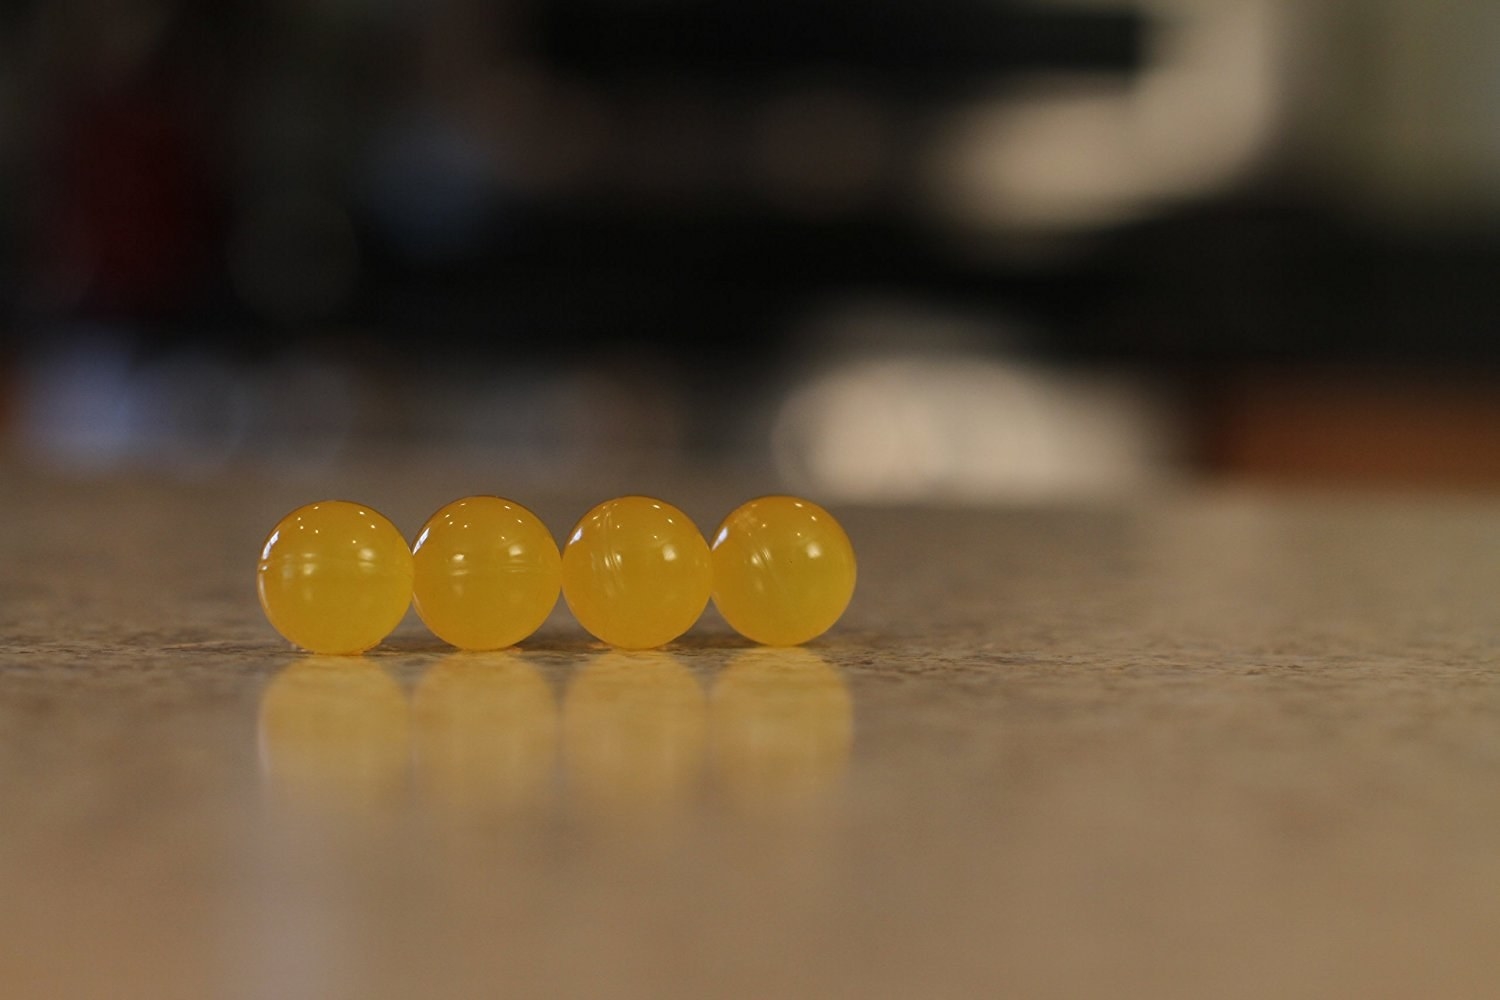 four of the yellow disposer fresher balls on a kitchen countertop